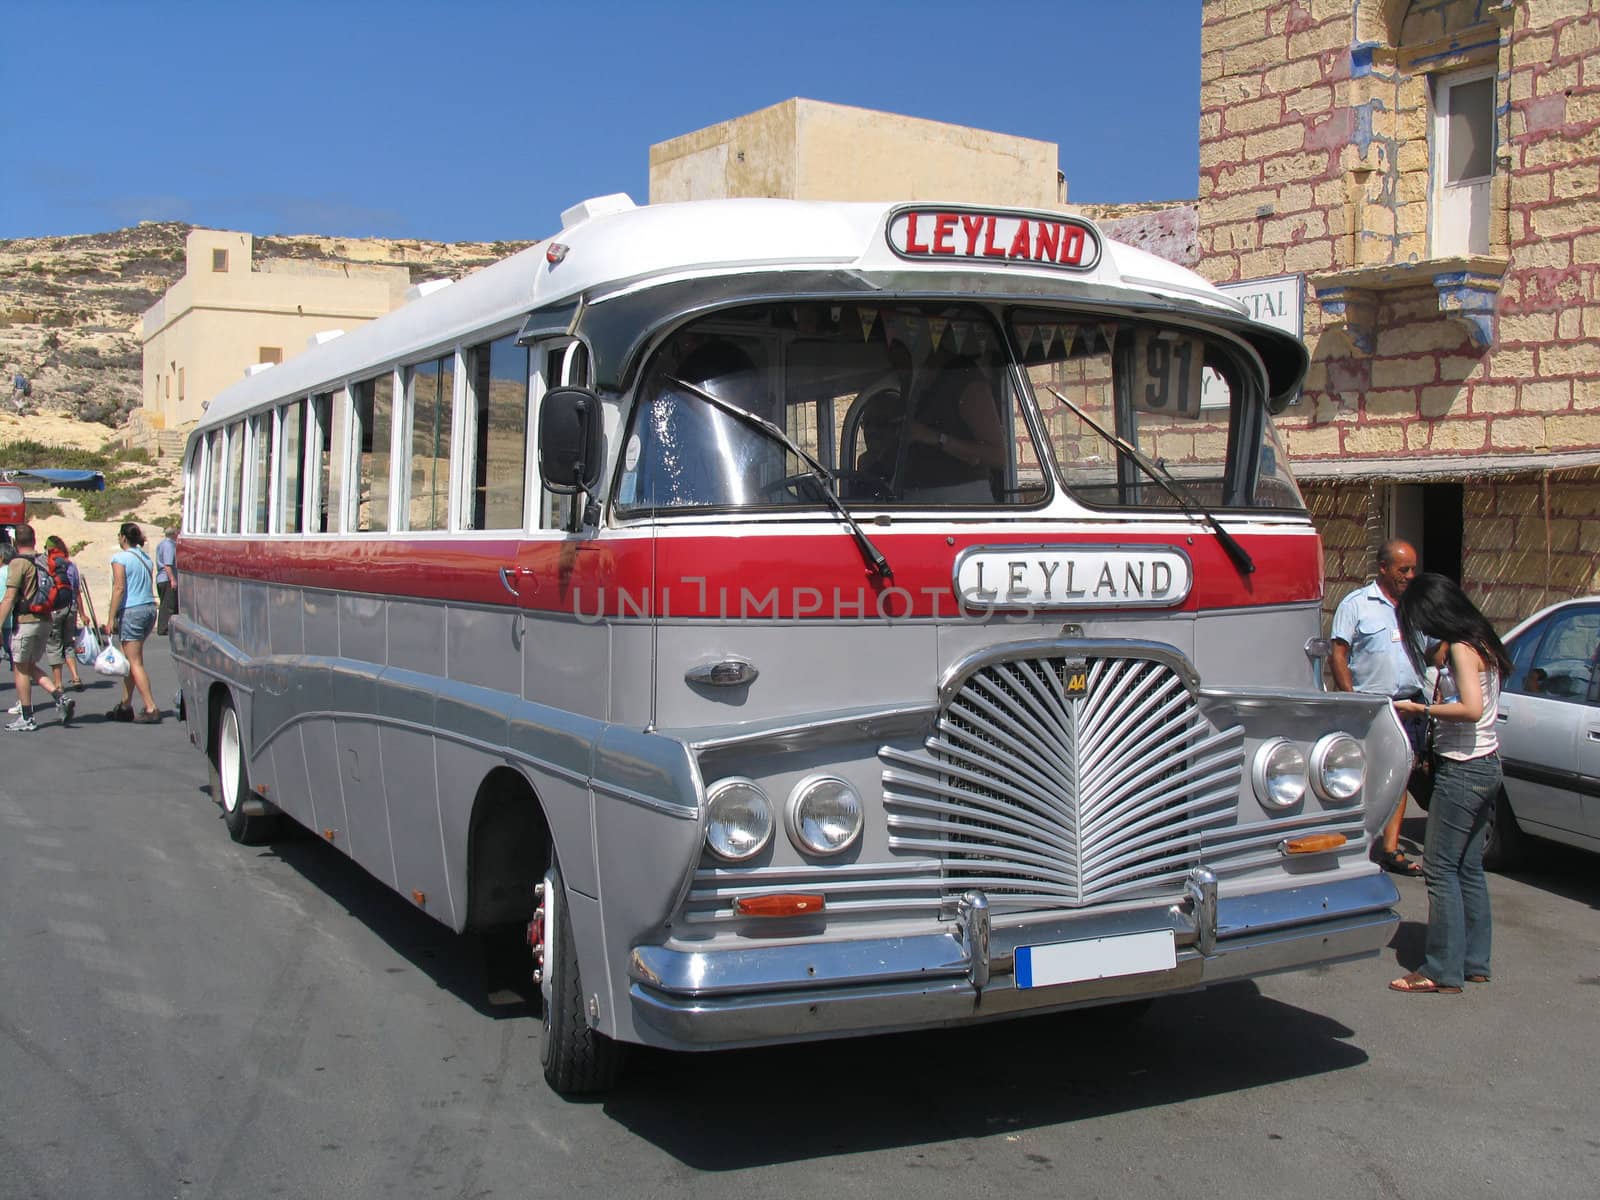 Old maltese bus by snowturtle